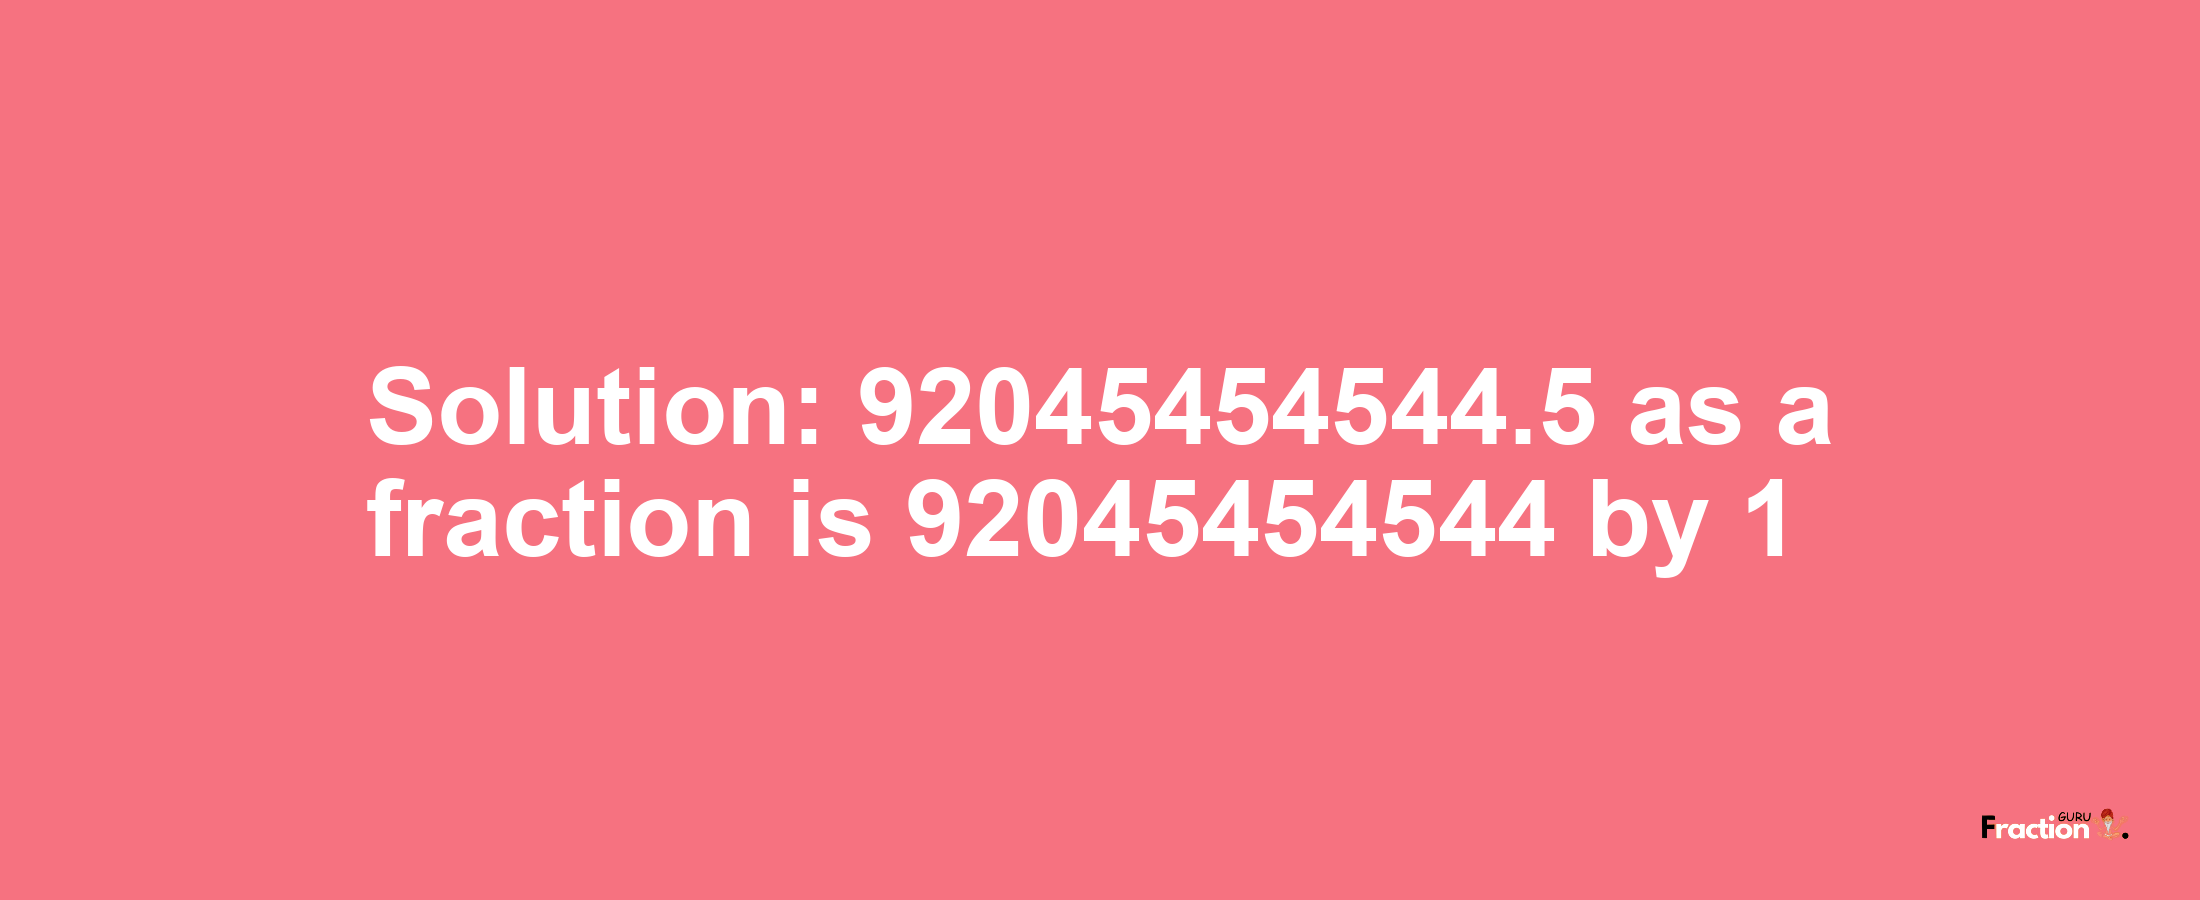 Solution:92045454544.5 as a fraction is 92045454544/1